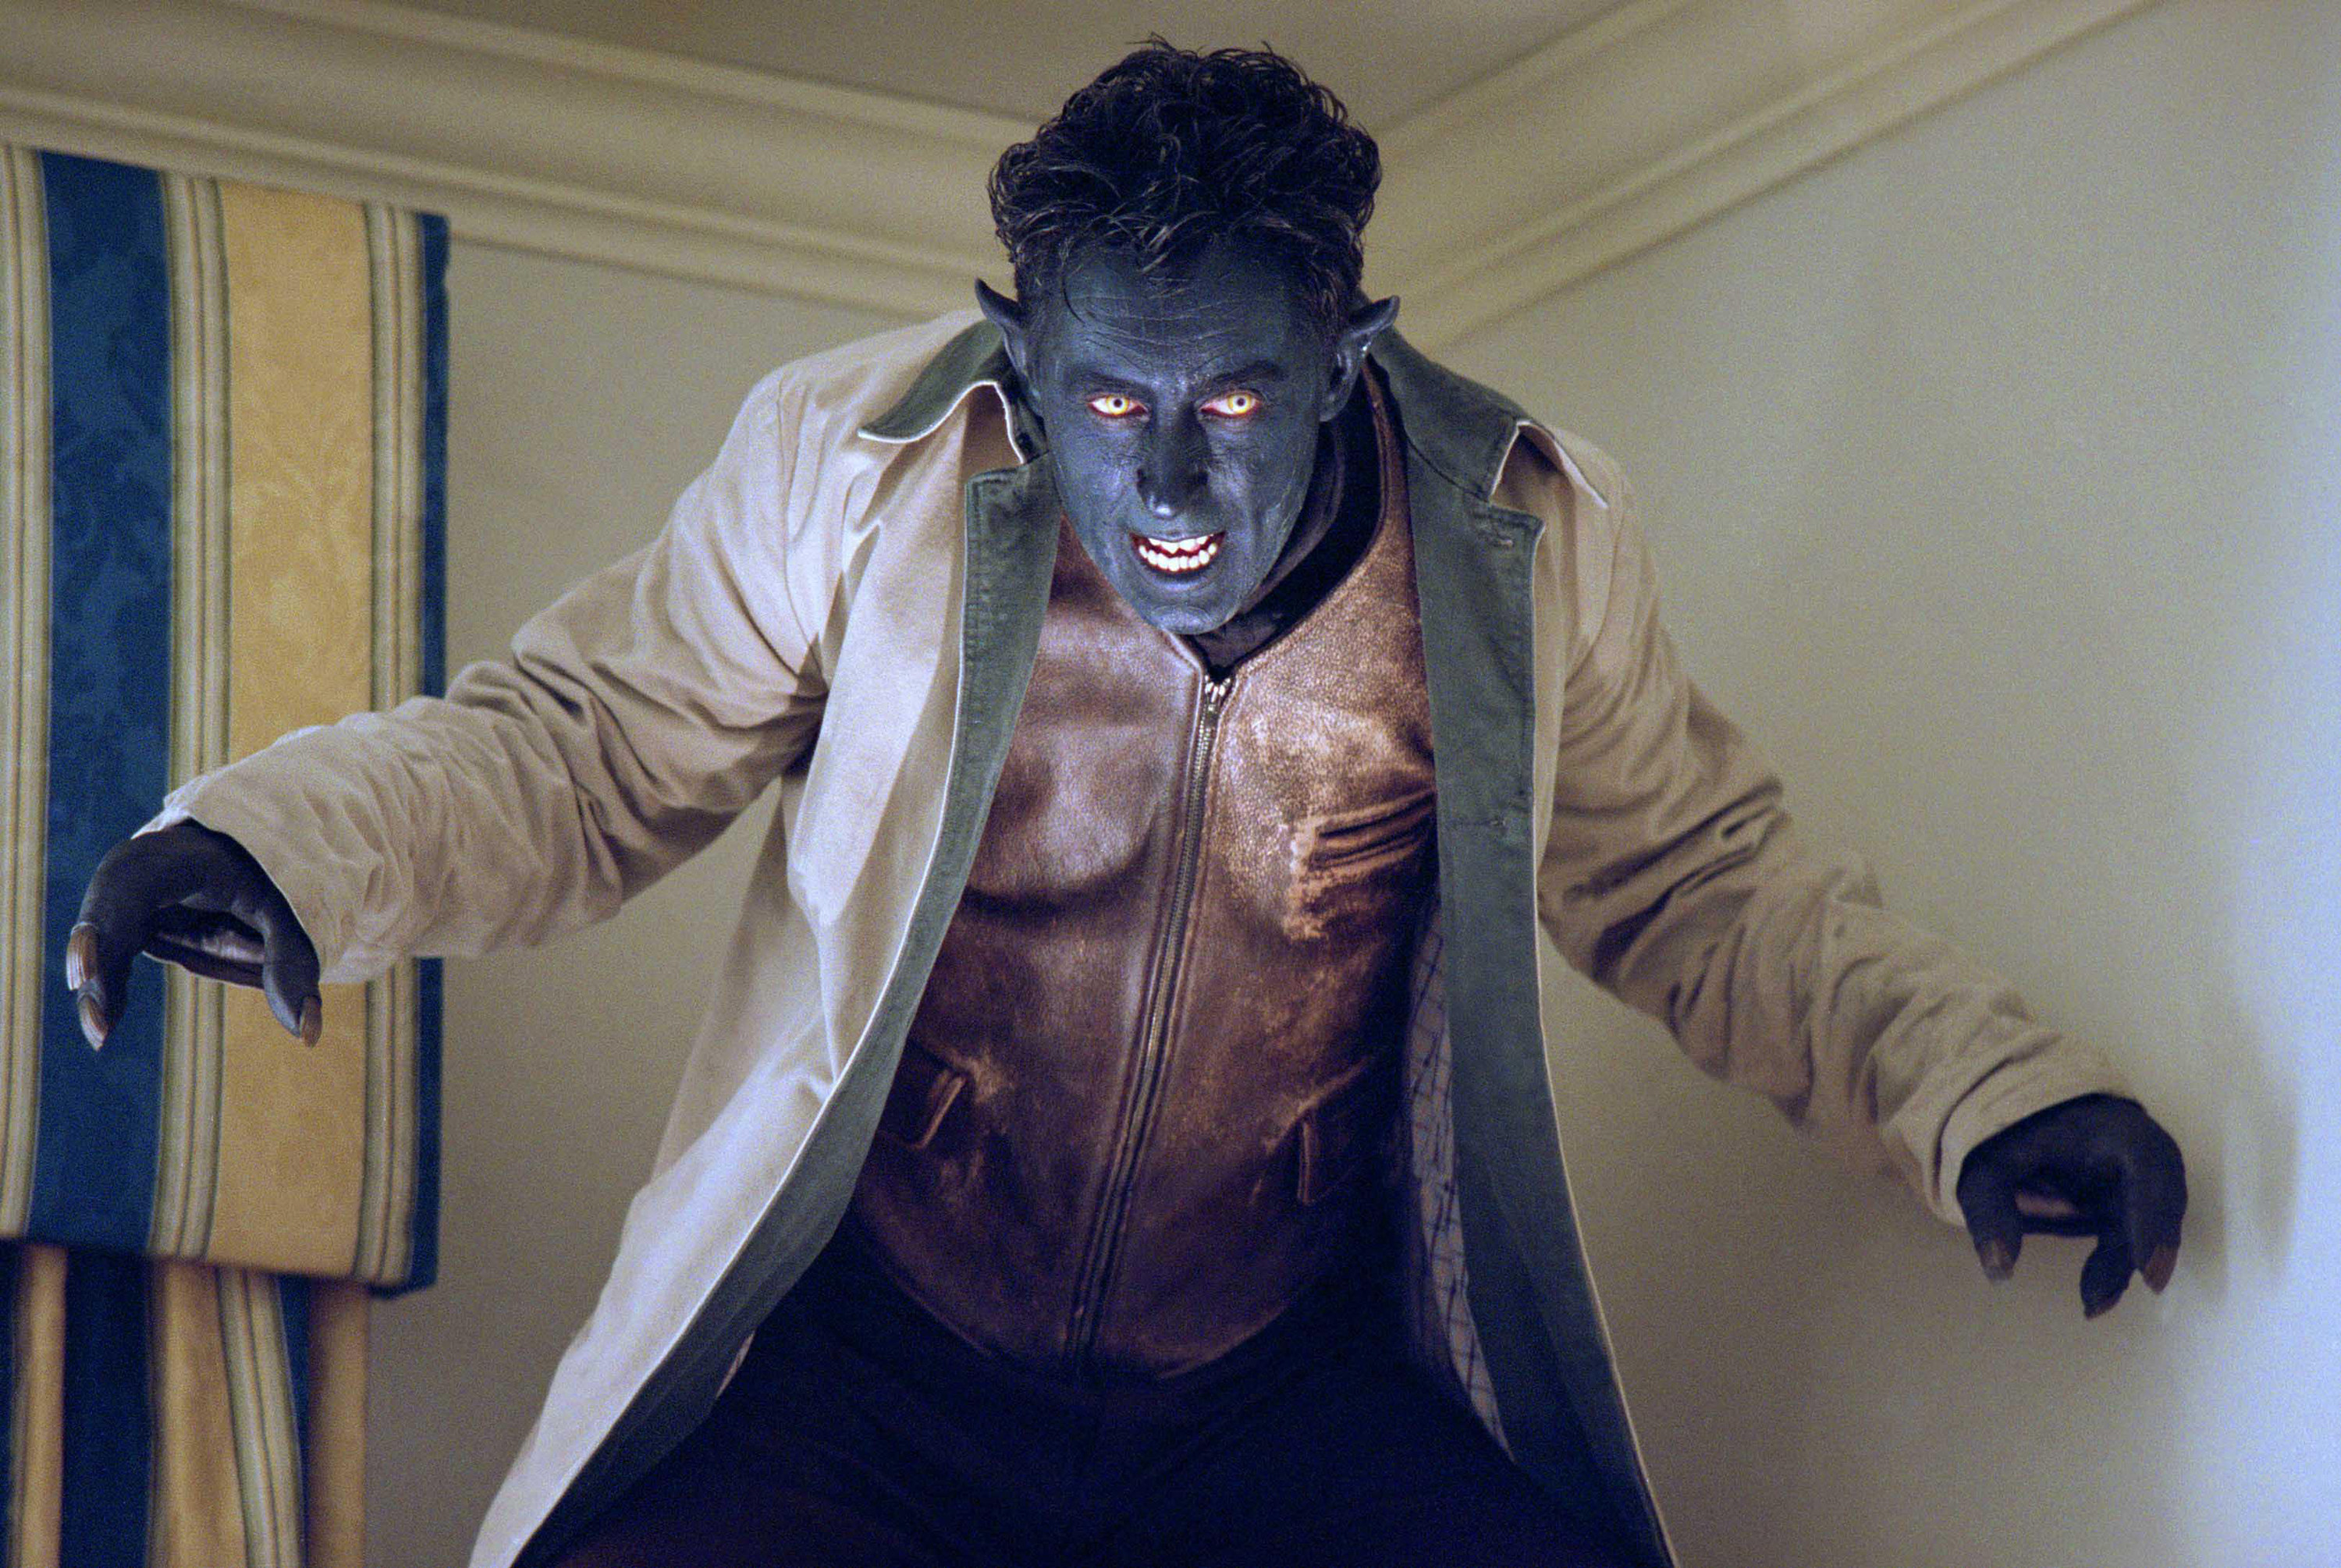 A blue skinned, demonic looking mutant in an overcoat stands in the corner of a room